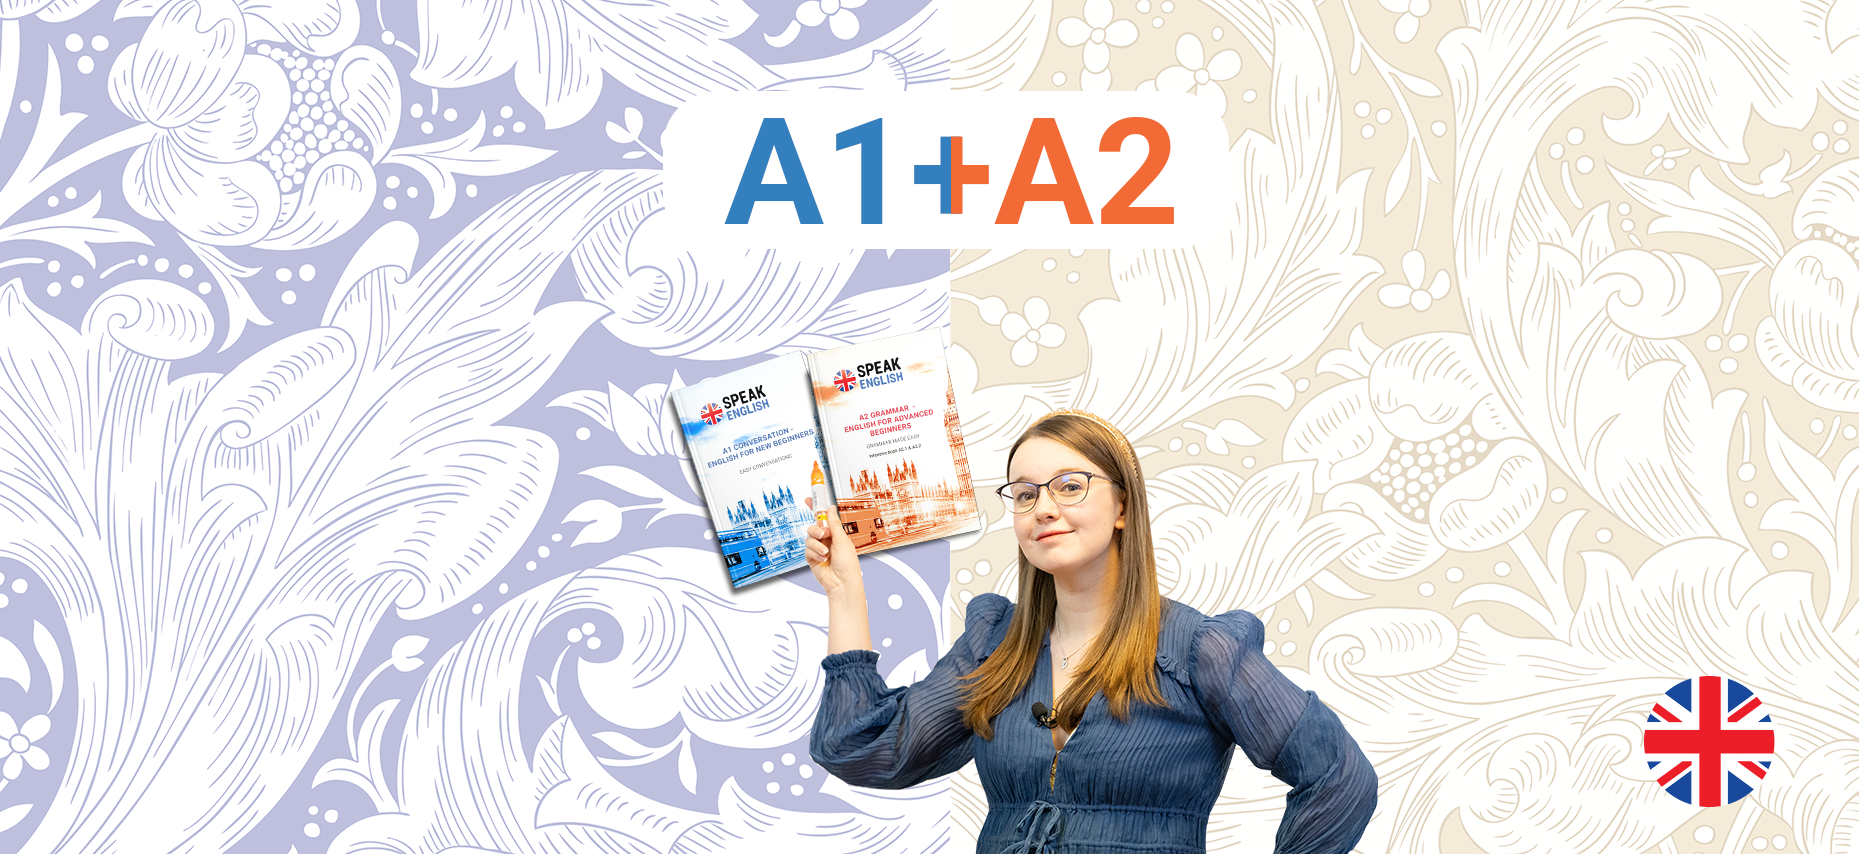 A1 and A2 level English course package for beginners